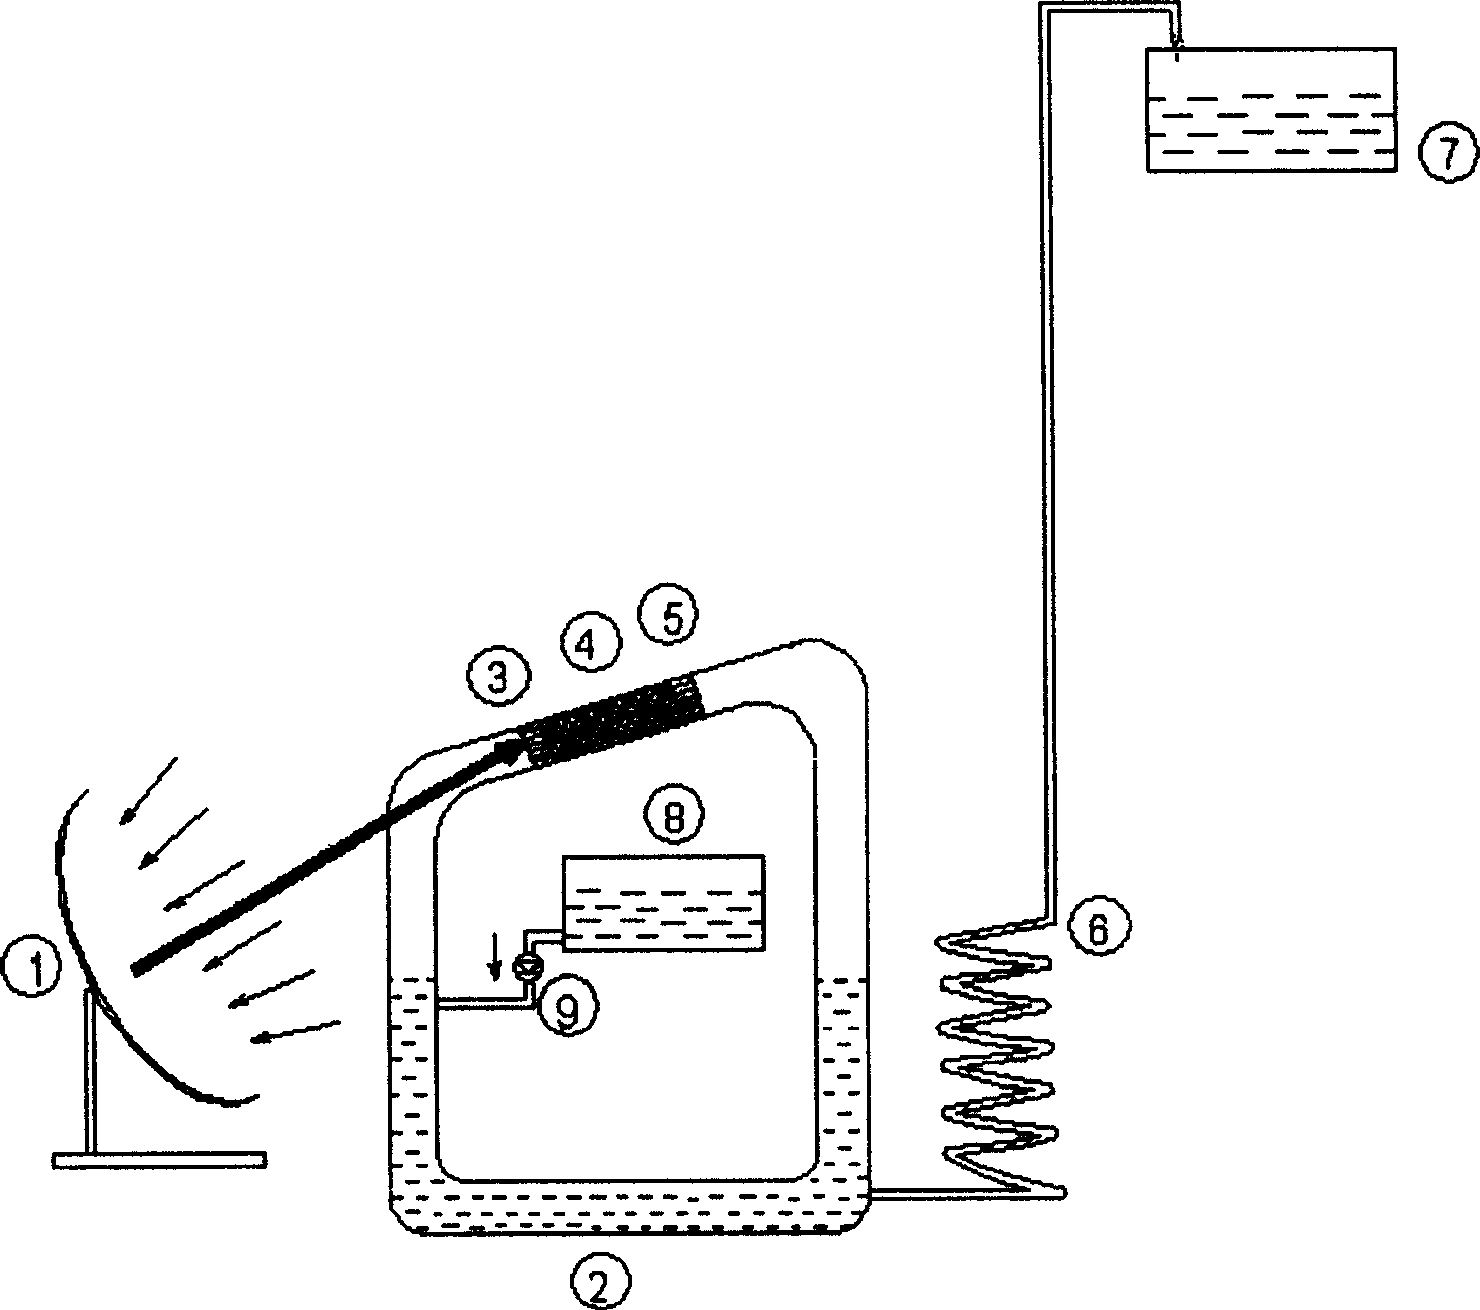 Heat sound water pumping system using solar energy as driving source and its water pumping method